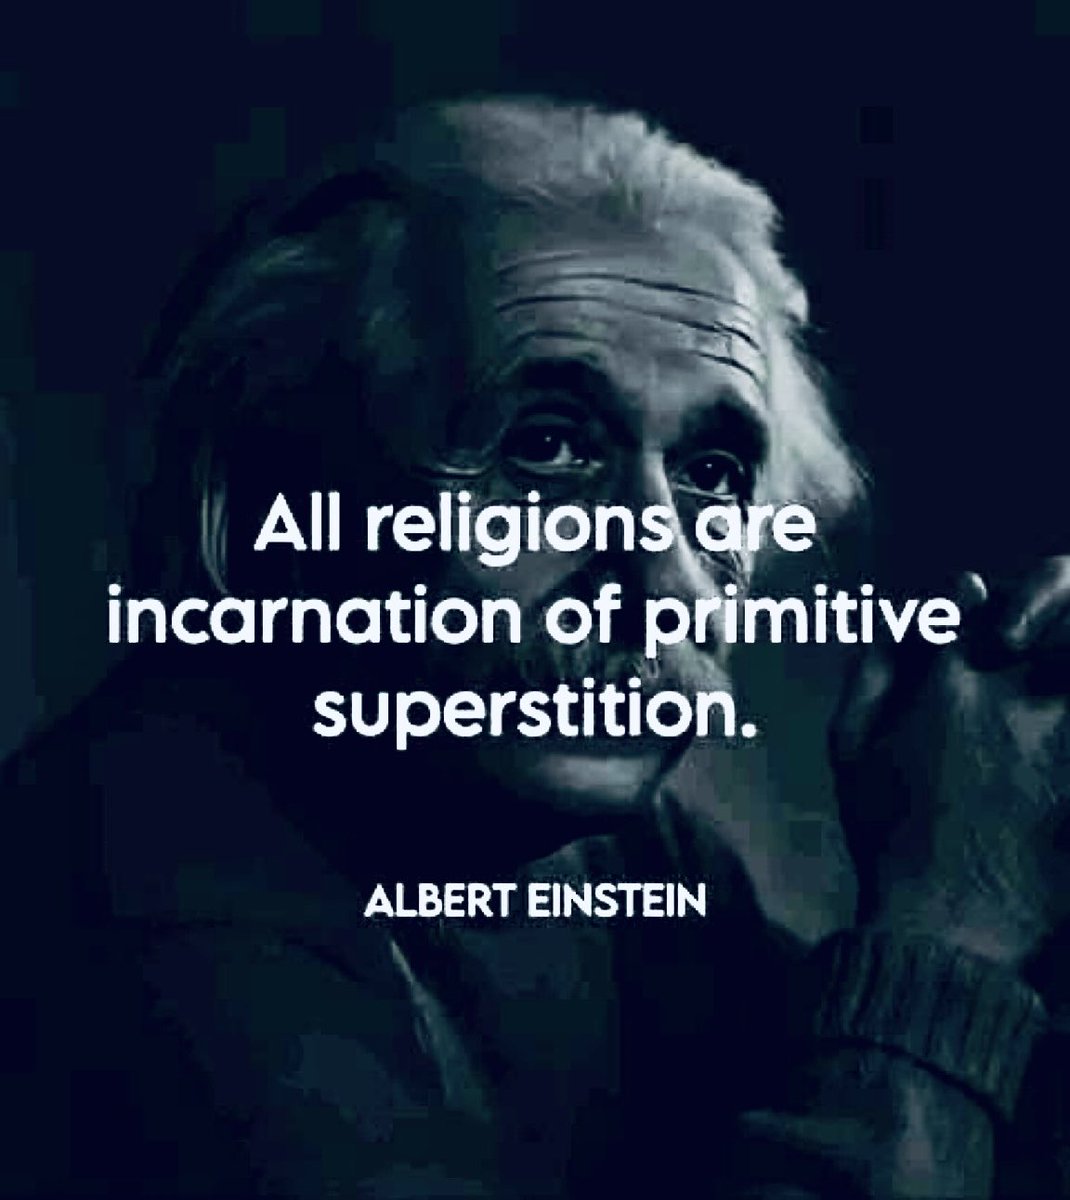 Religion: primitive superstitions that need to tossed to the four winds 💨